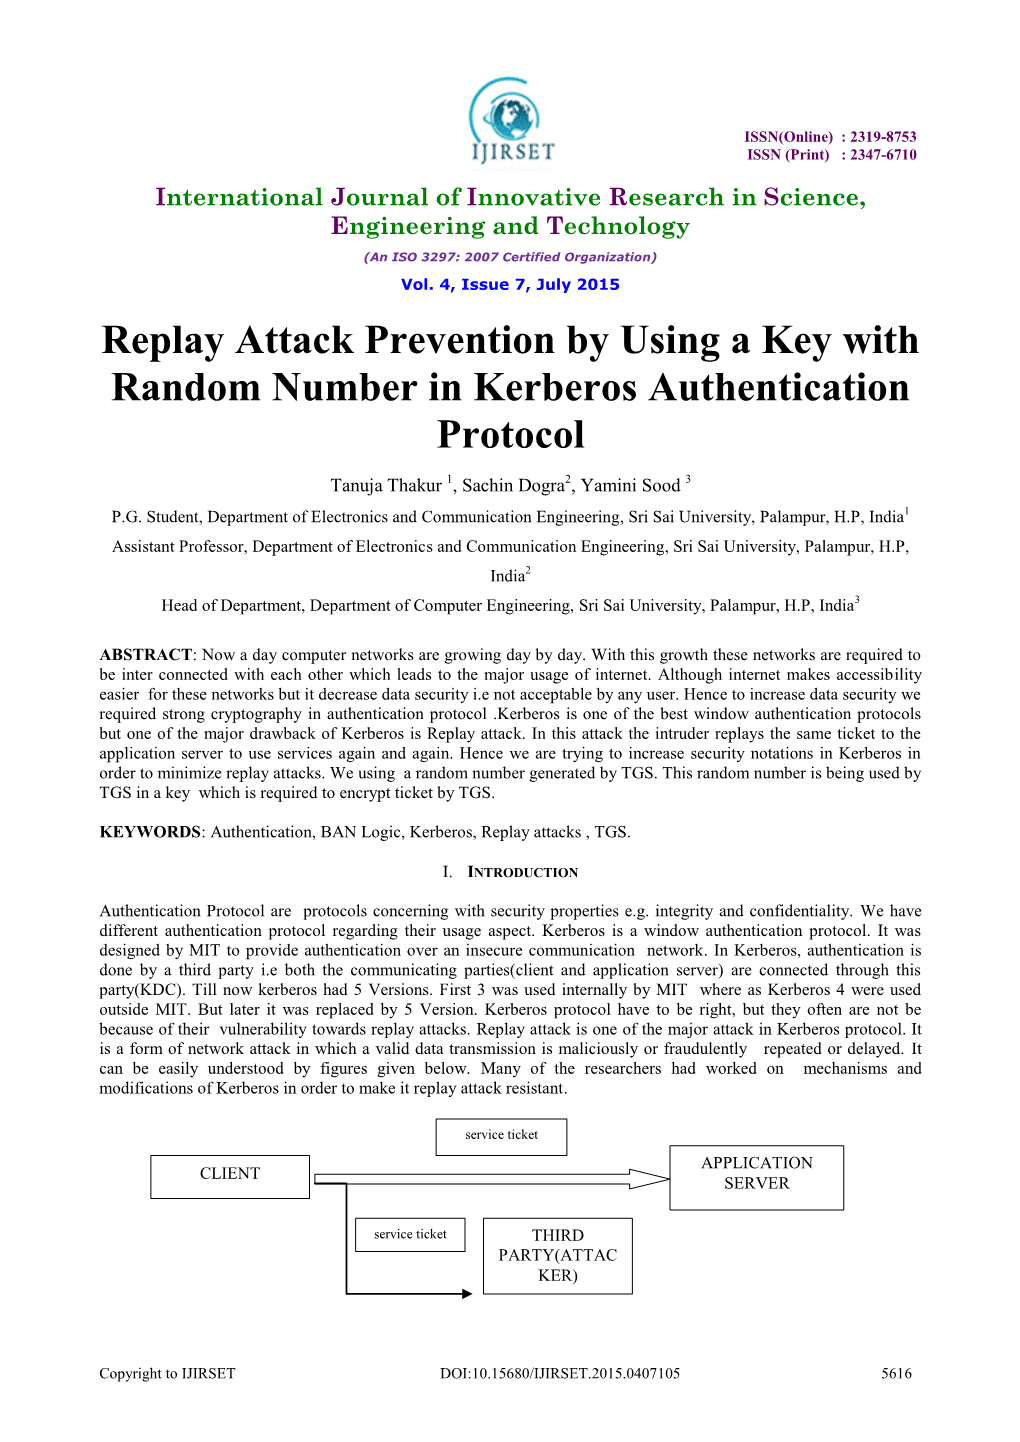 Replay Attack Prevention by Using a Key with Random Number in Kerberos Authentication Protocol